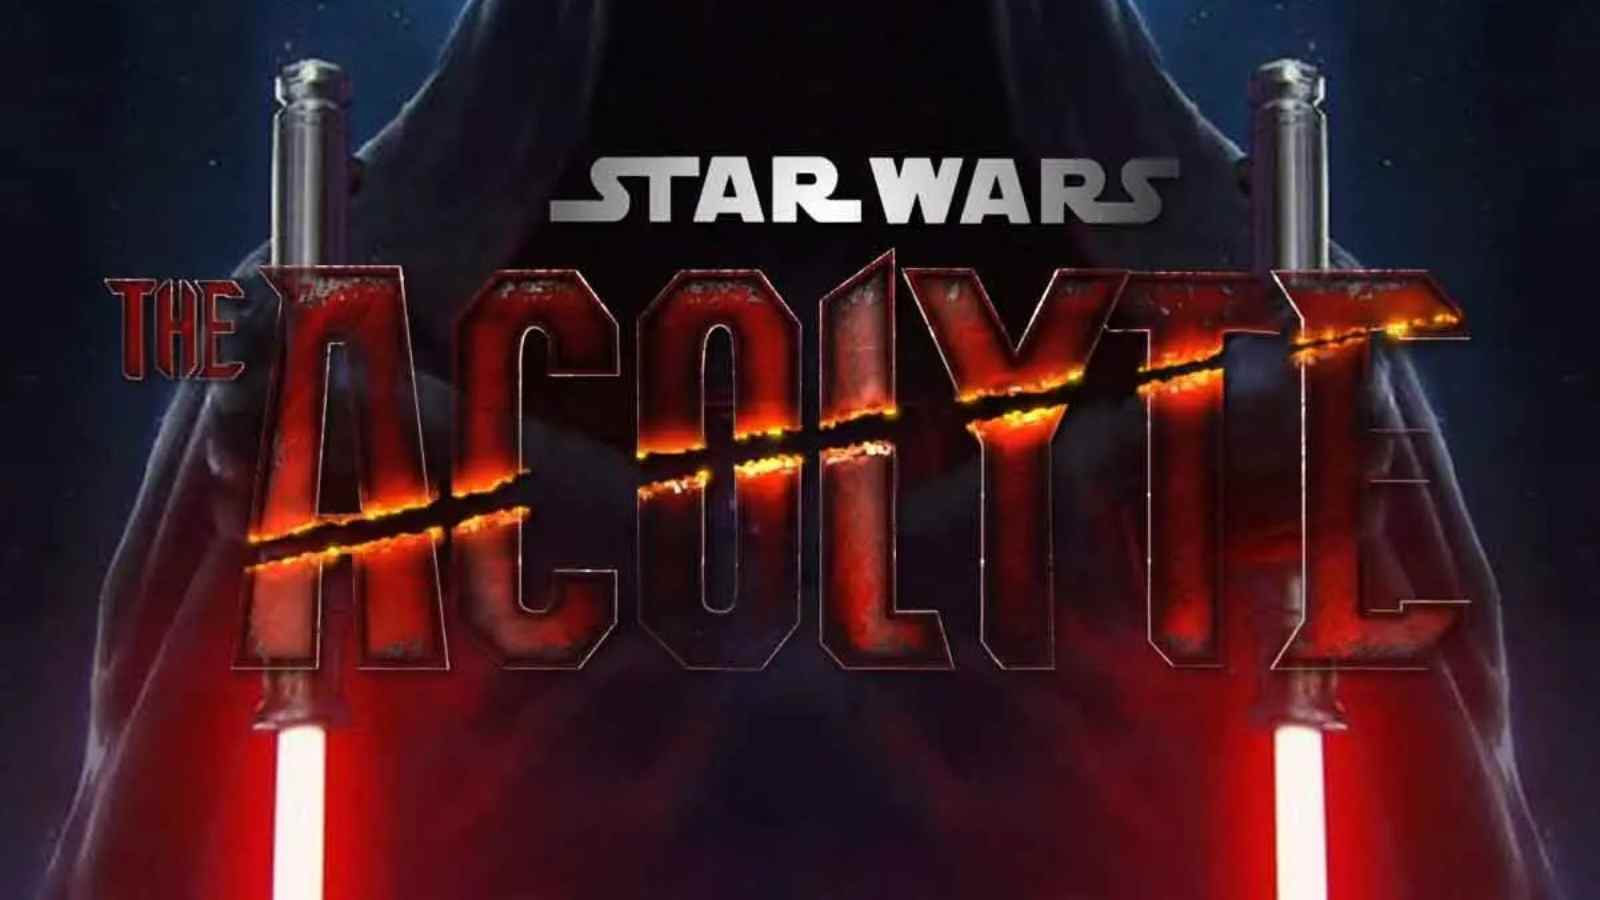 Star Wars-the Acolyte